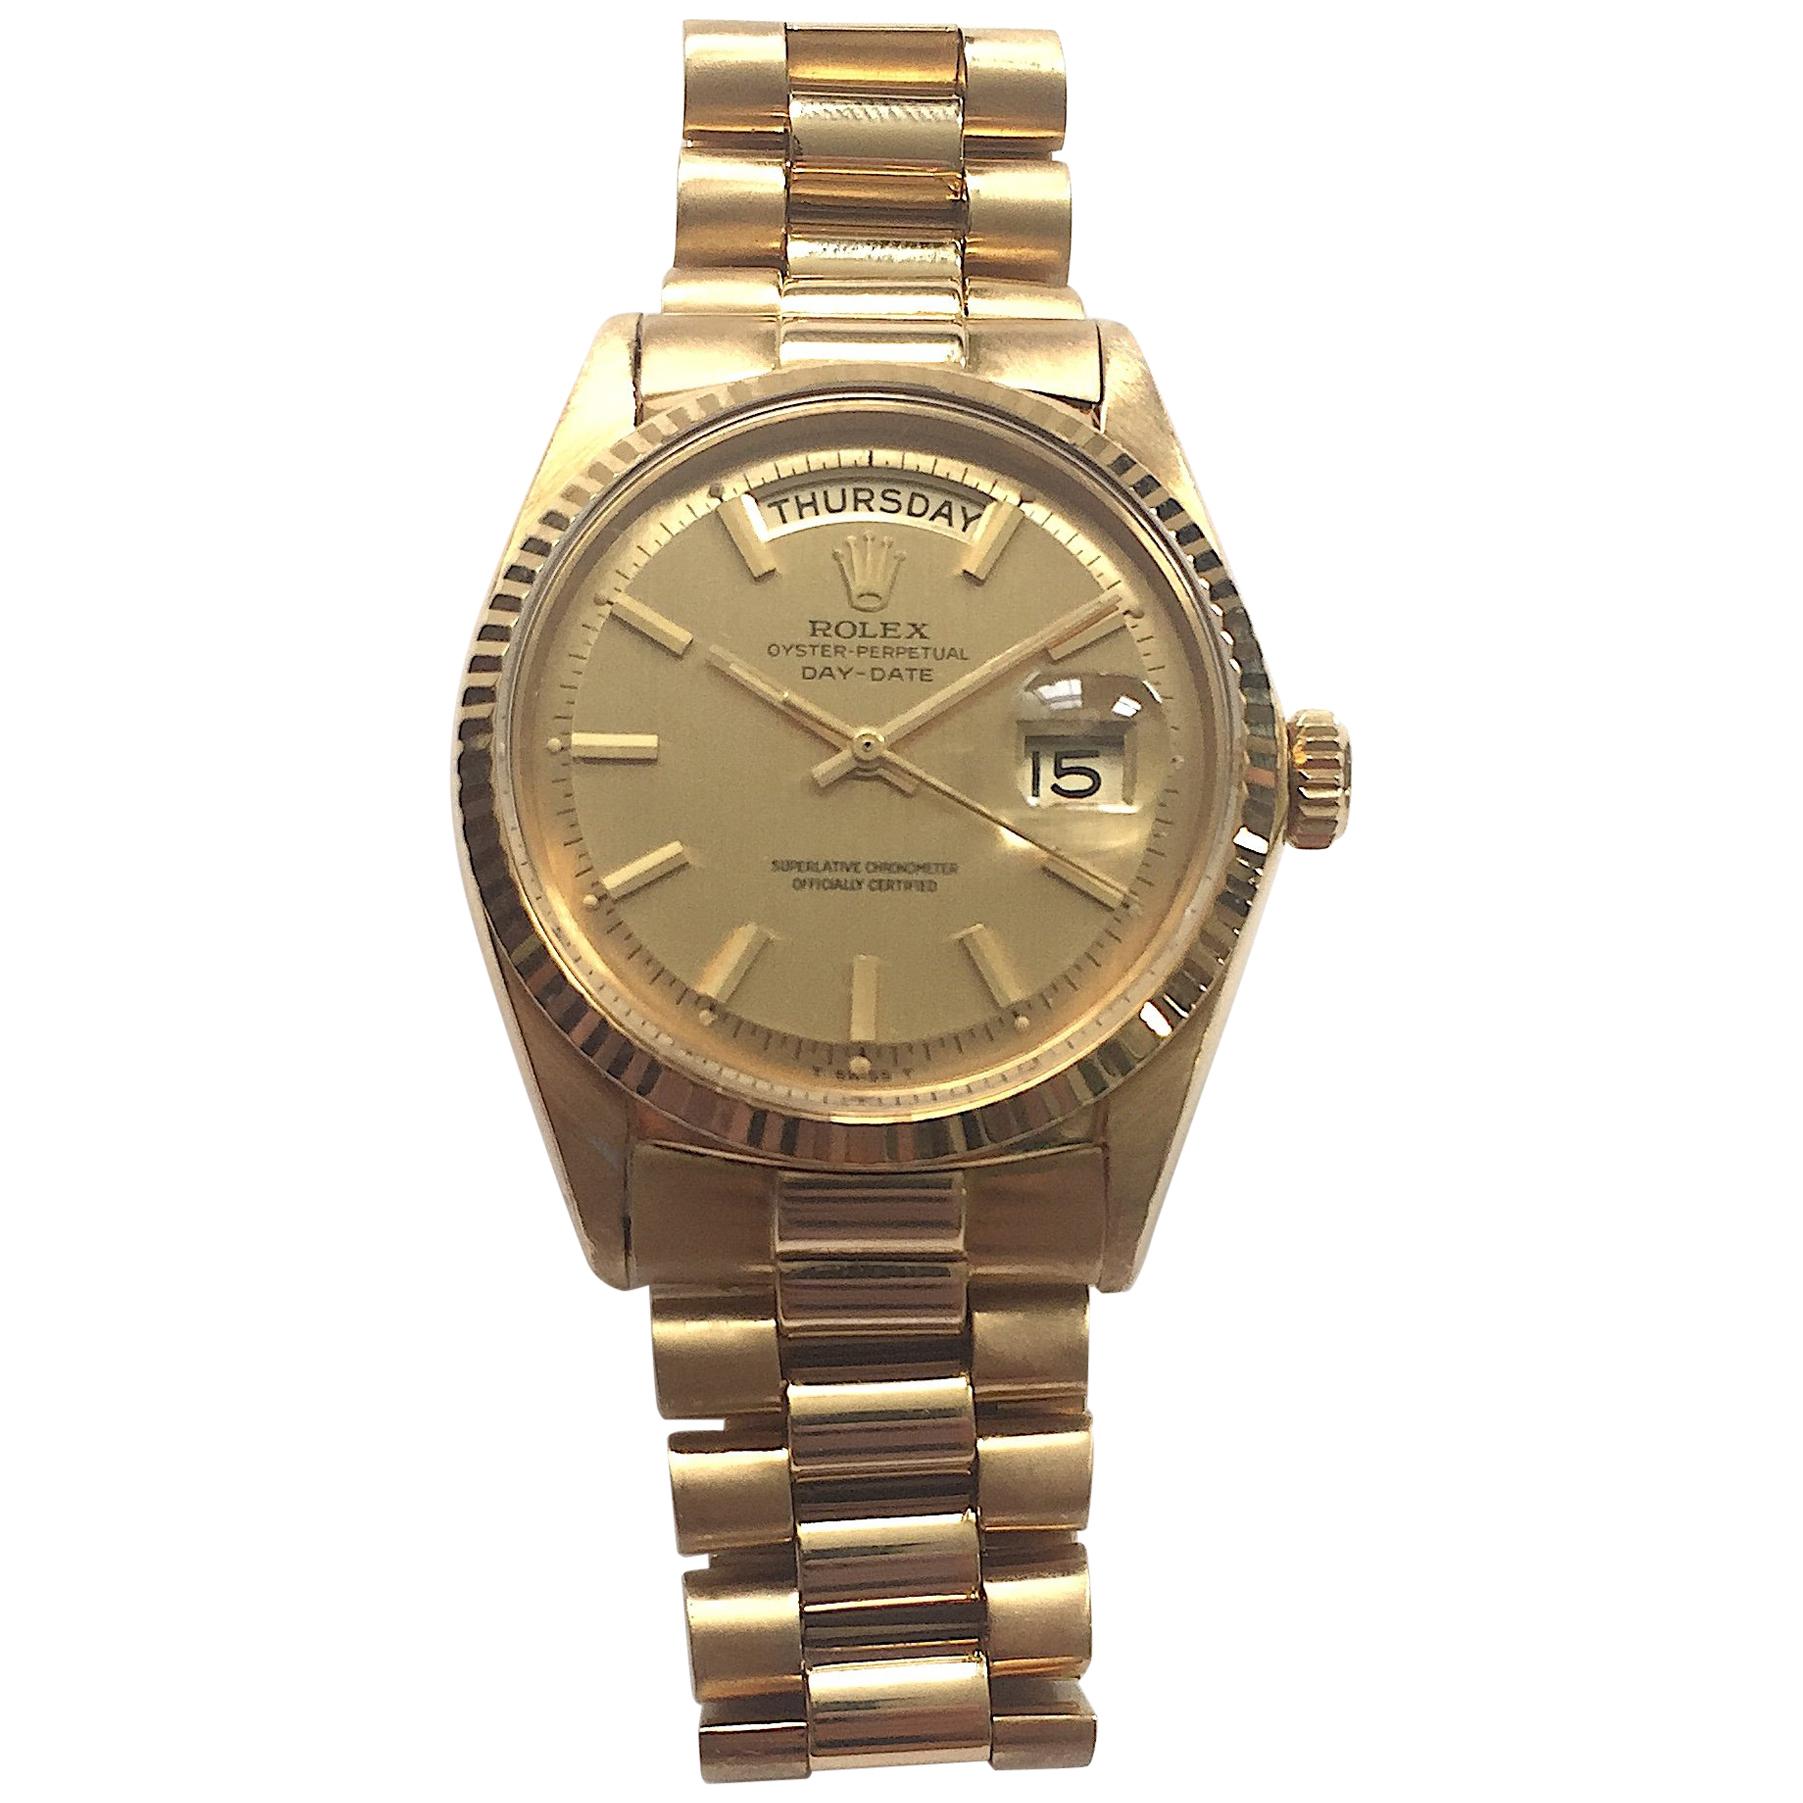 Rolex Yellow Gold Day Date Shantung Dial Automatic Wristwatch 